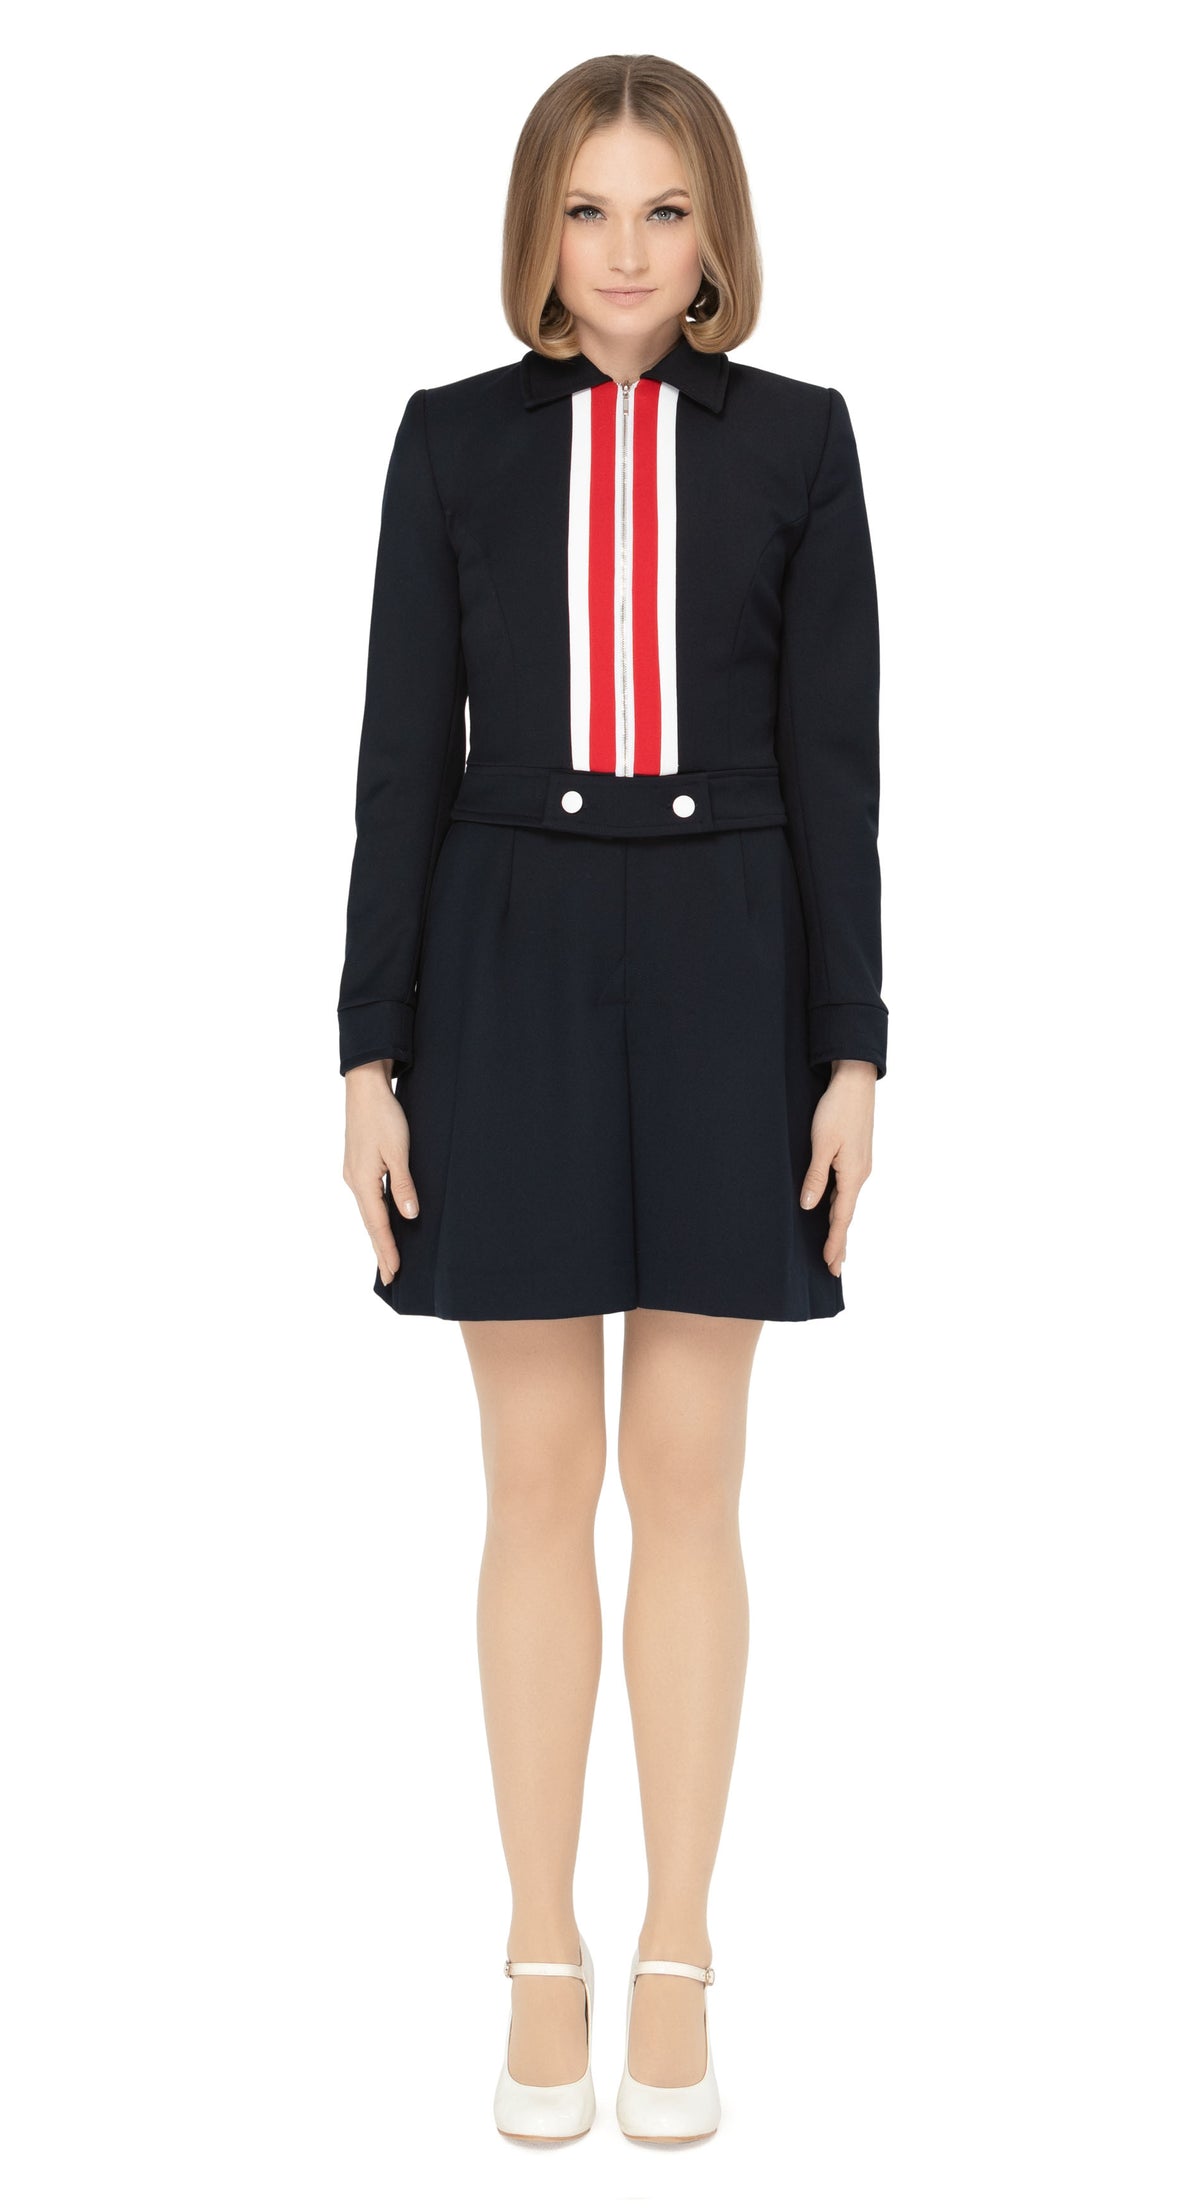 The perfect matching jacket for our sophisticated Mod Style Navy-Blue/Red/White Zippered Dress with Stripes or our Mod Style Navy-Blue/Red/White Zippered Skirt with Stripes. Crafted from the same Italian mill fabric as the dress and skirt, ensuring the perfect match in both color and texture. With a tailored fit and unique front zippered torso, this jacket perfectly complements the dress and skirt silhouette and detailing.